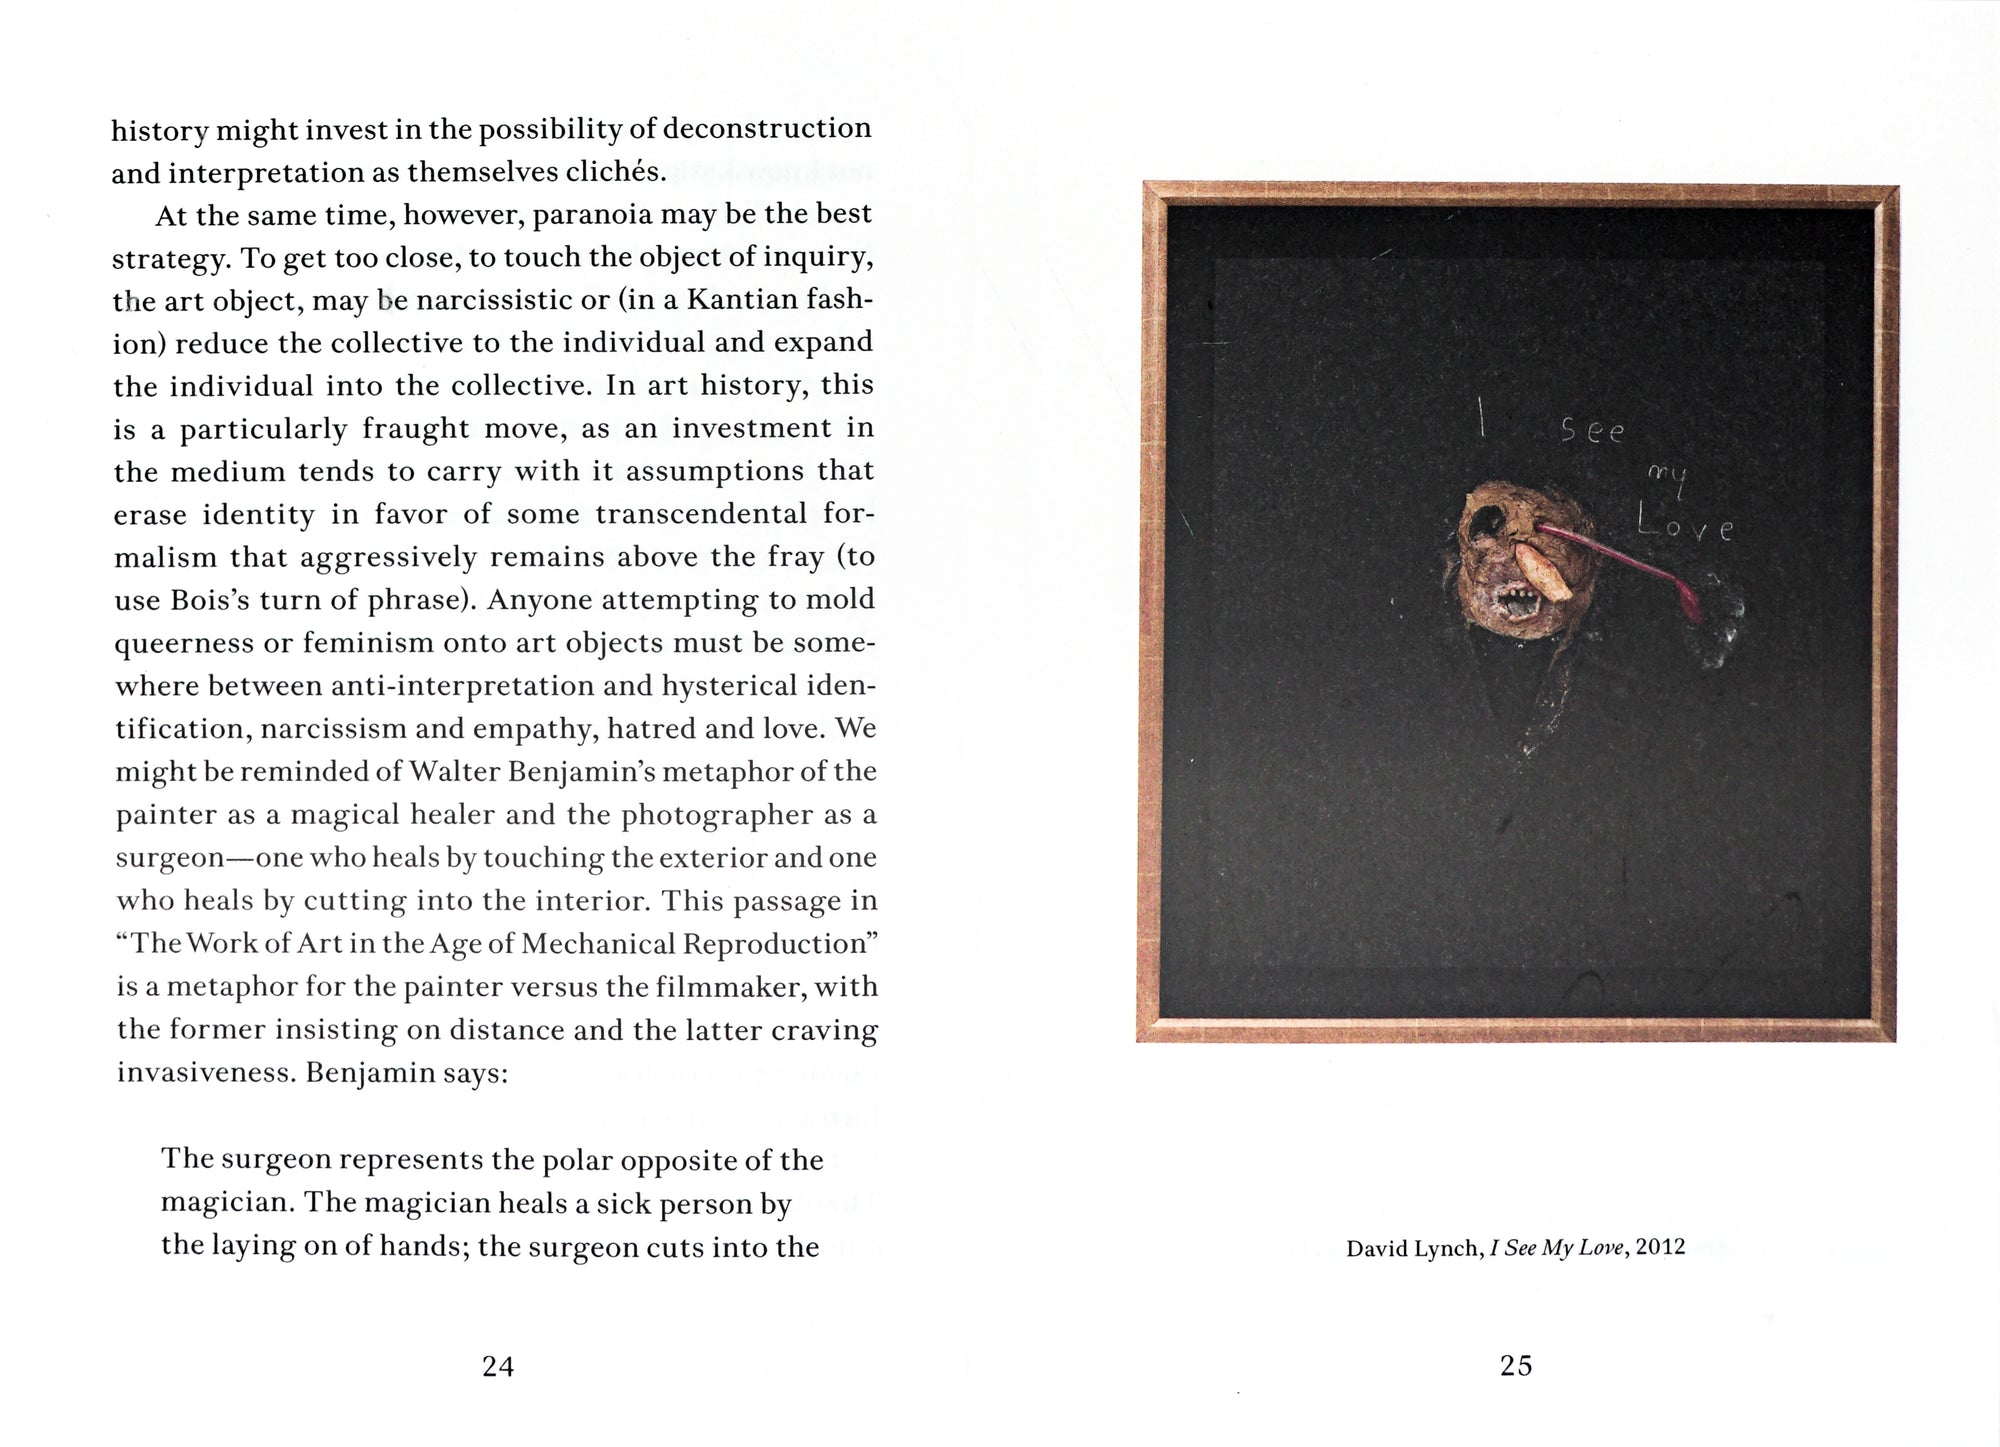 Spread of the book, with a painting by David Lynch on one side and explication of the painting on the left side.